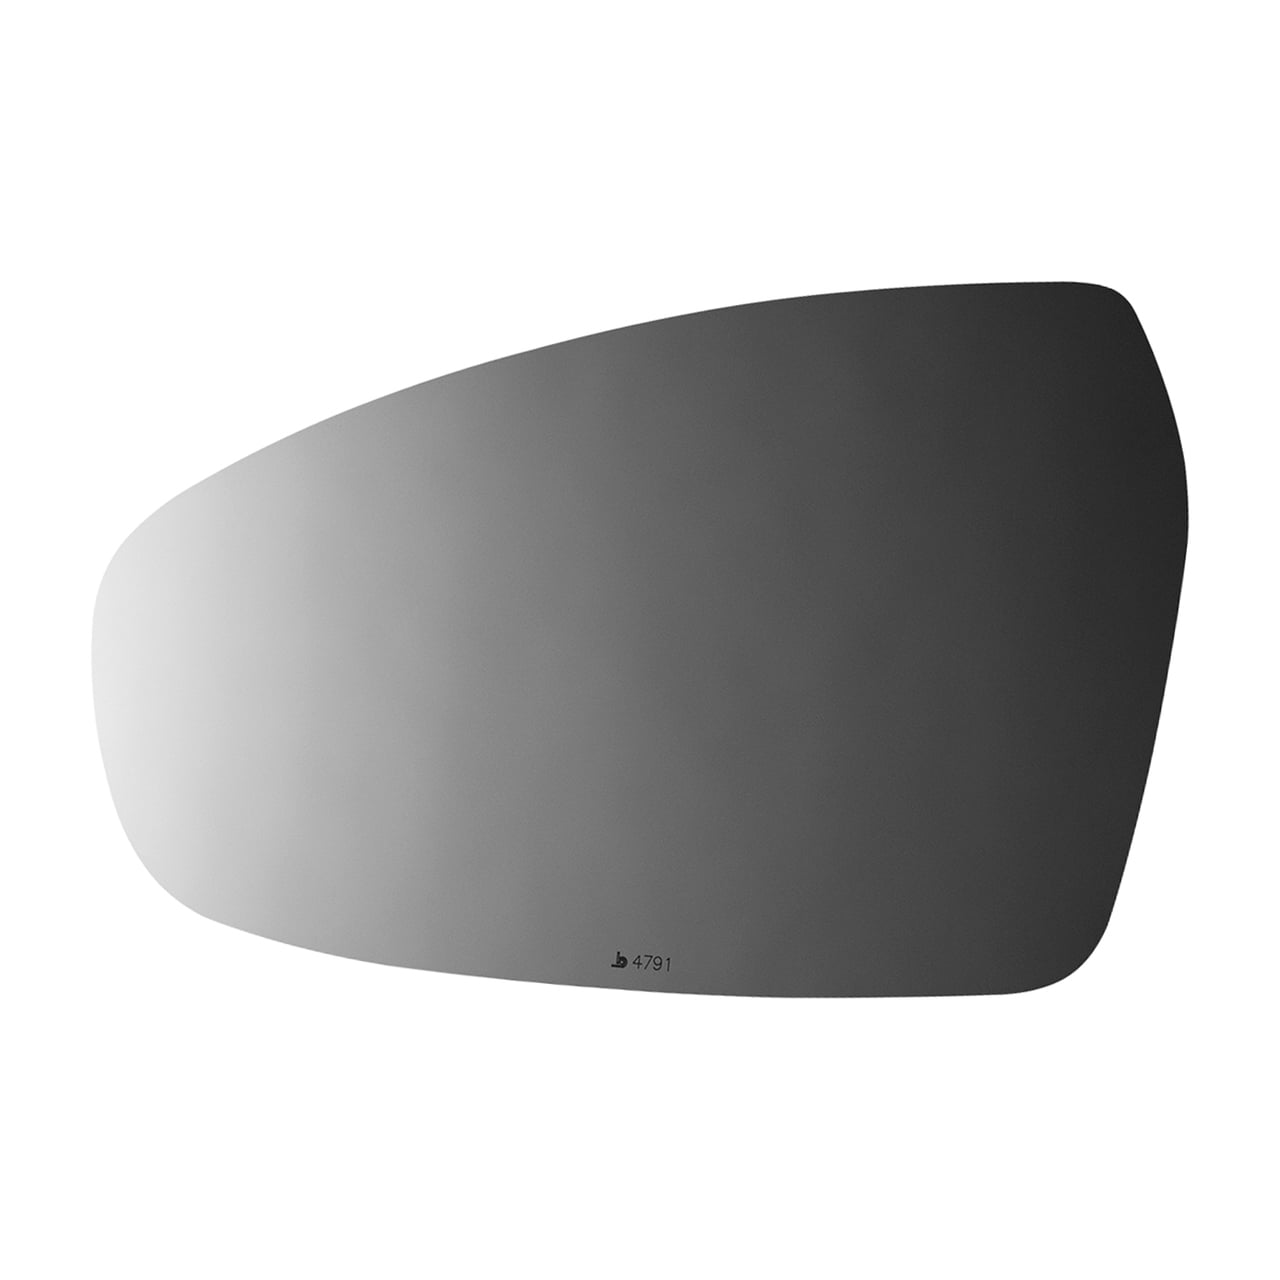 Flat Driver Side Replacement Mirror Glass for 2019 KIA FORTE - Walmart.com - Walmart.com 2019 Kia Forte Driver Side Mirror Replacement